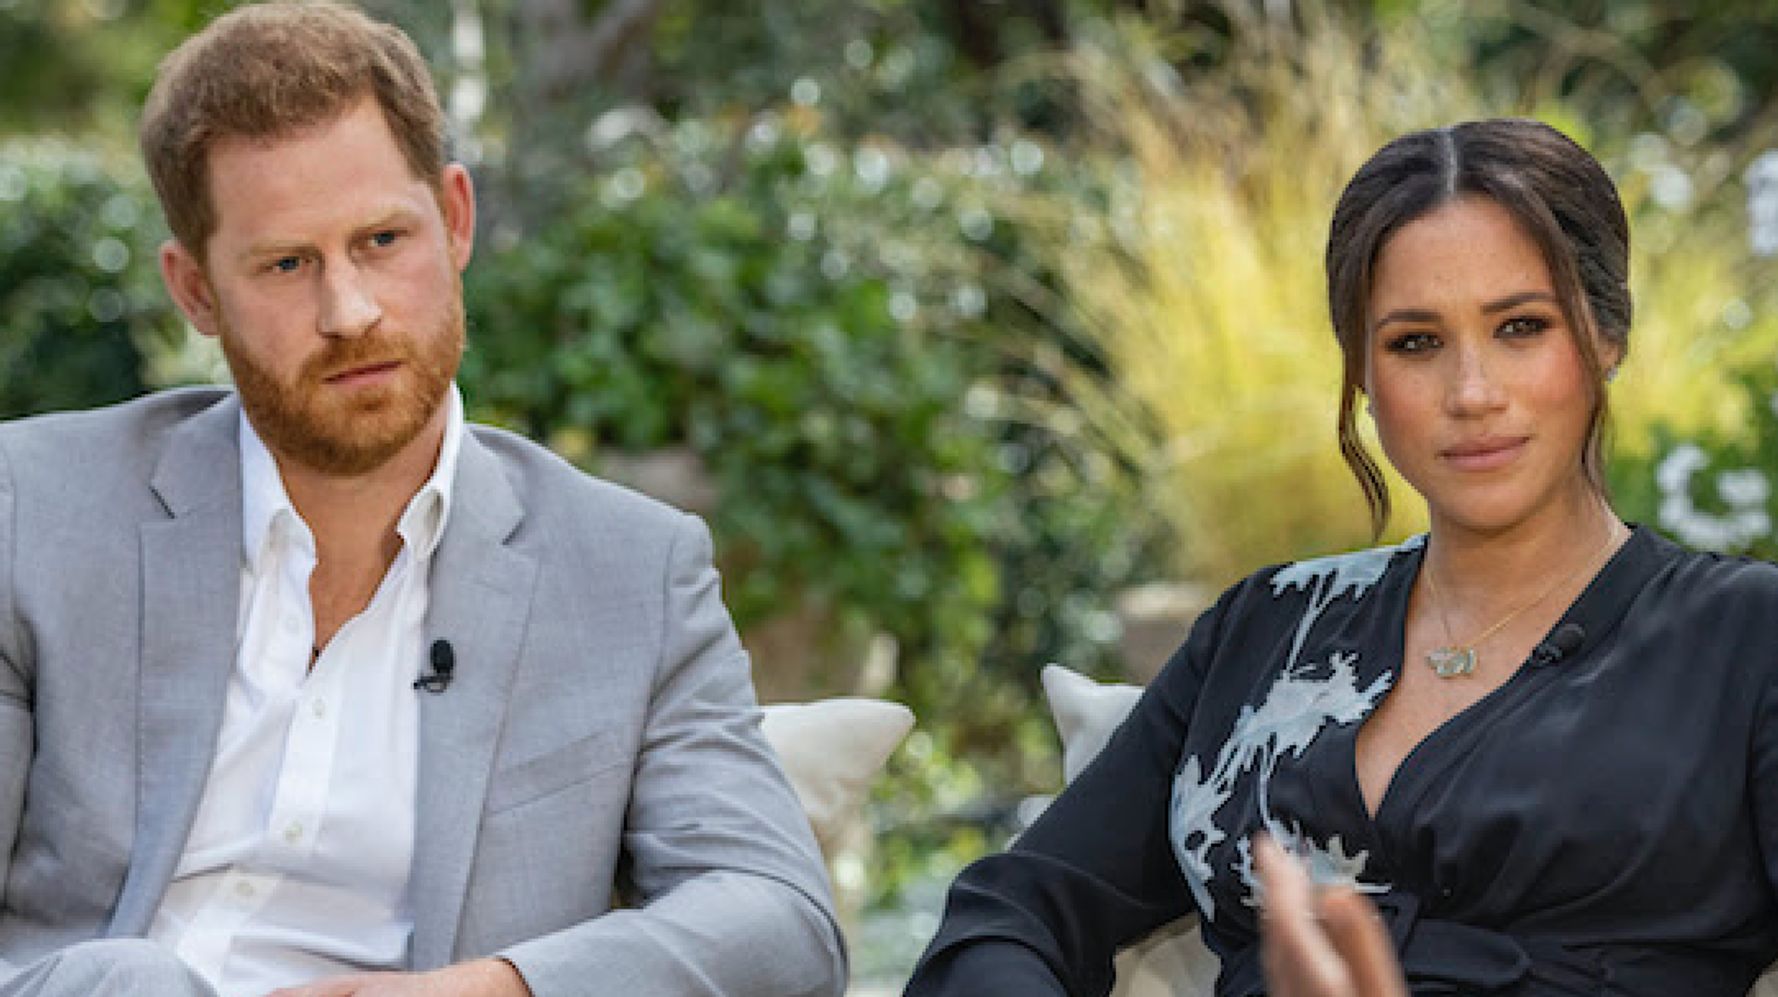 Oprah Winfrey Reveals What Surprised Her In Meghan Markle, Prince Harry Interview